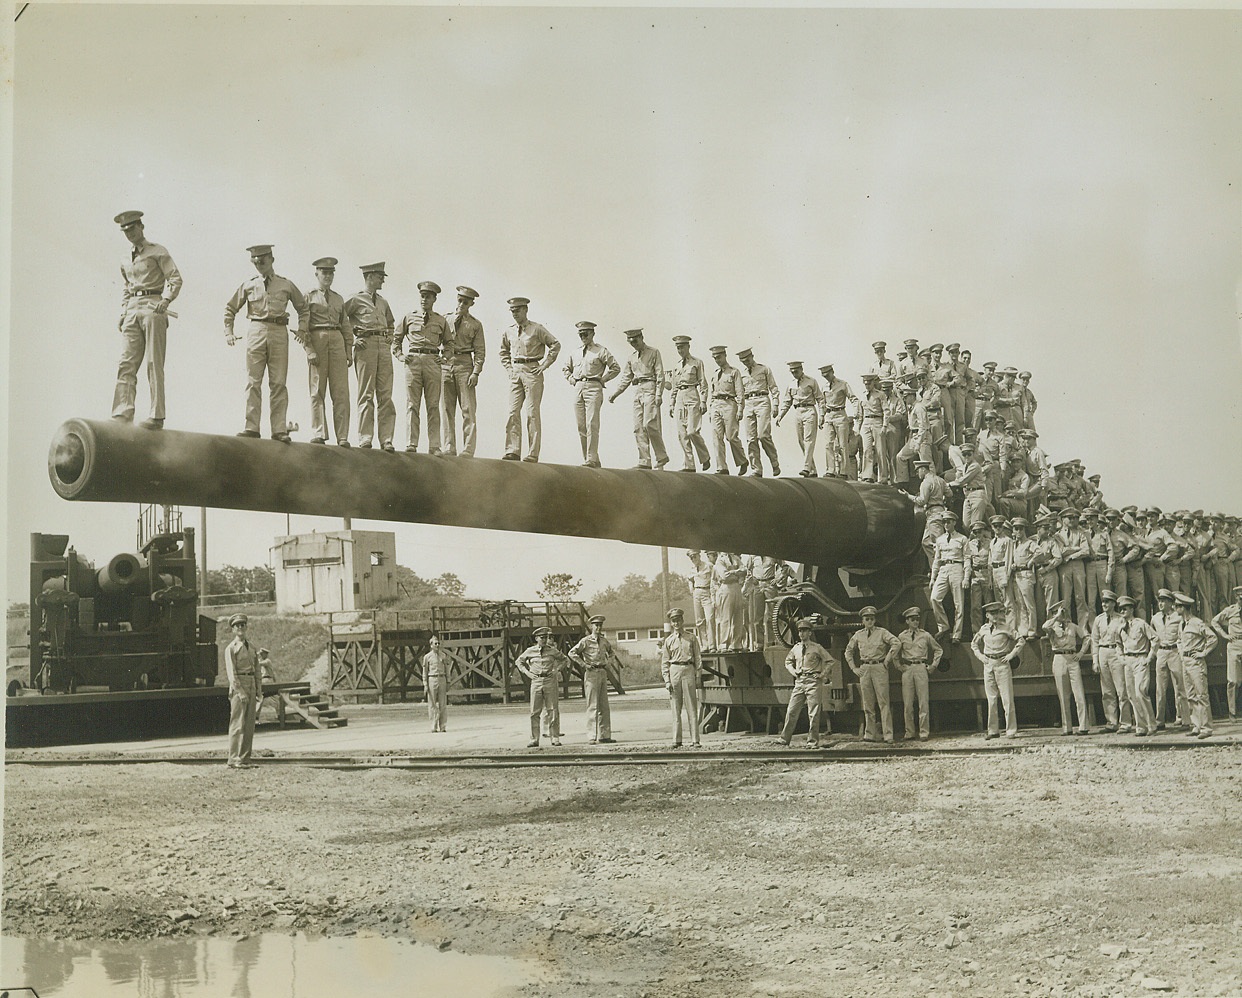 Mighty Diving Board, 6/1/1944. ABERDEEN, MD. – In the 21st annual training visit to the Aberdeen, Md., Proving Grounds, 303 members of the graduating class of the West Point Military Academy were introduced to the might of American ordnance. They saw everything from the little carbine to the powerful 16-inch gun. Here they pose with one of the 16-inchers which they later saw in action. Credit: (ACME);